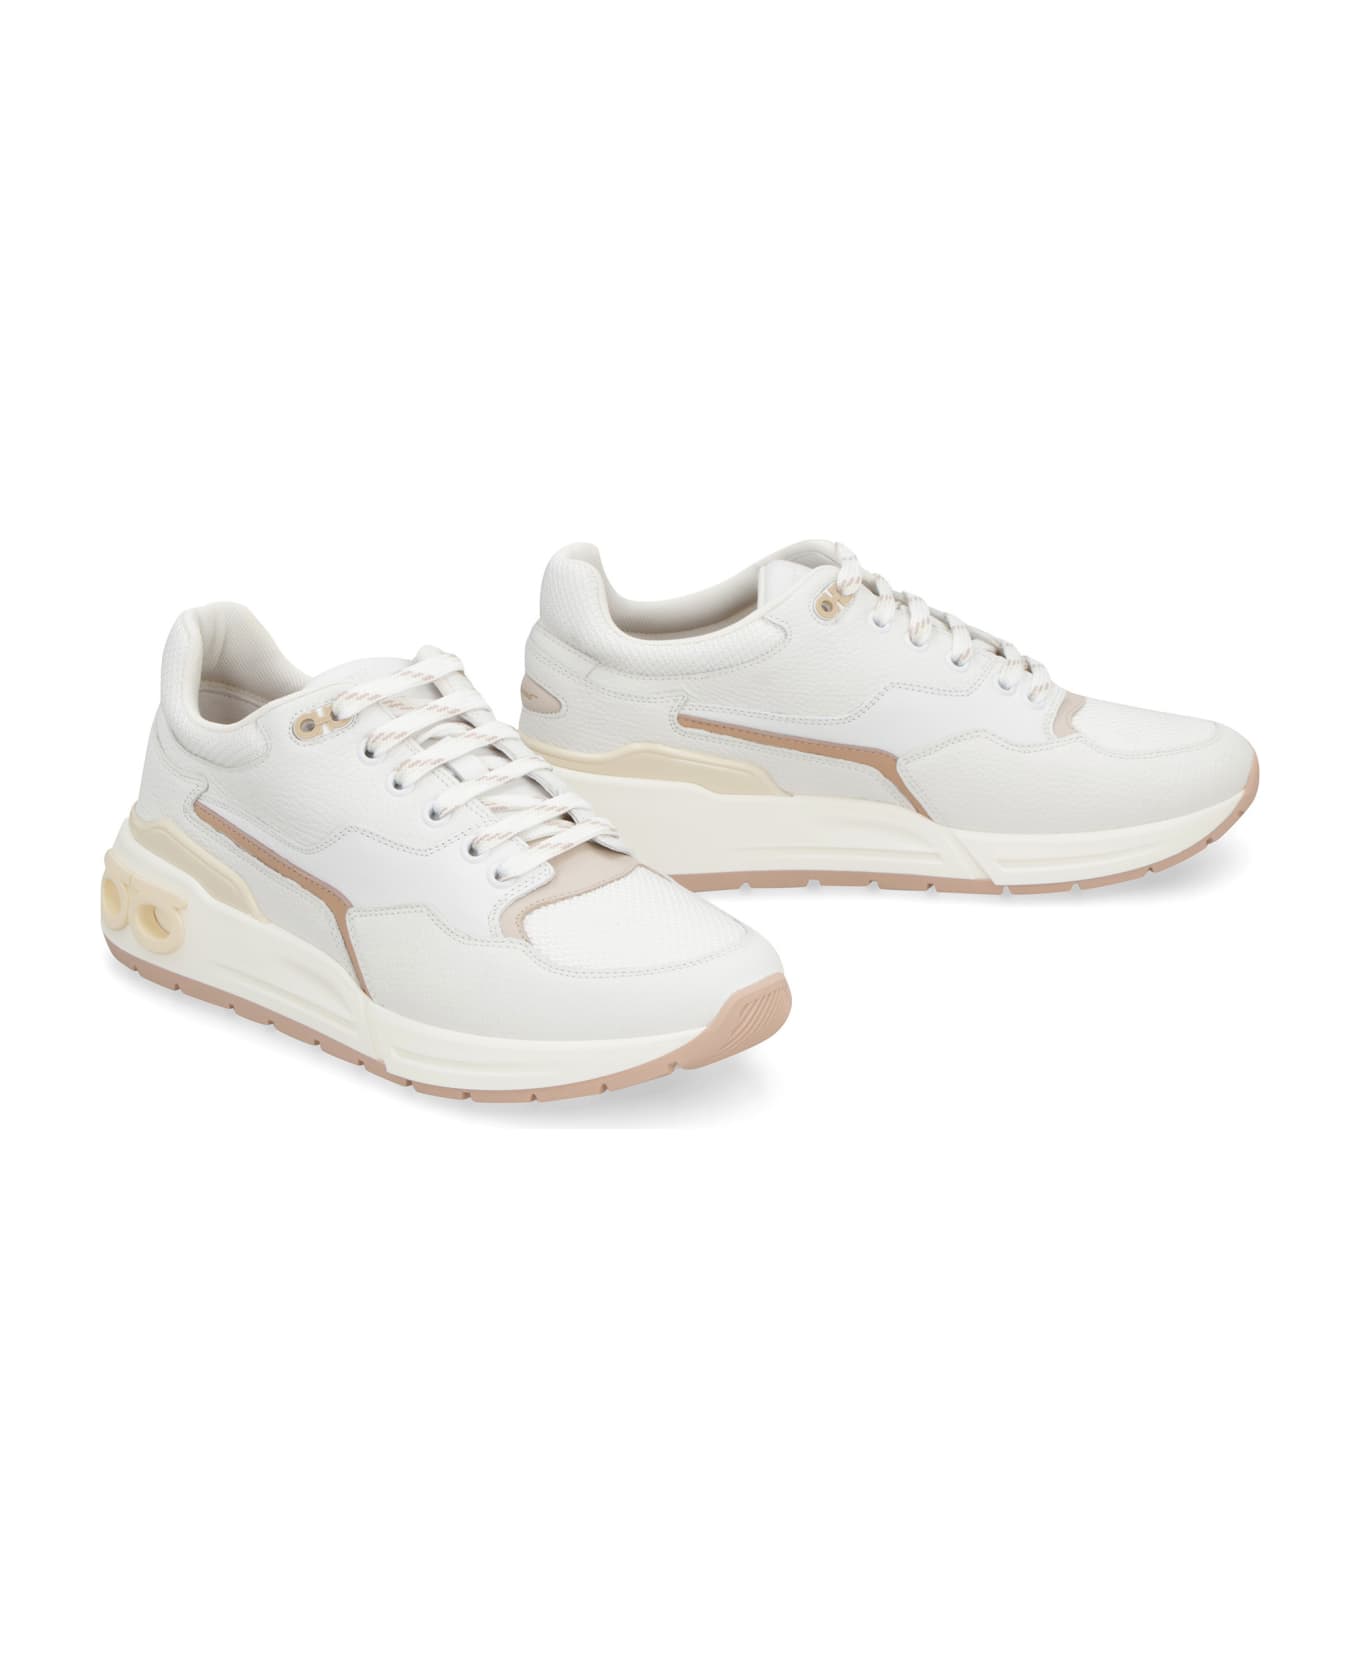 Ferragamo Leather And Fabric Low-top Sneakers - White